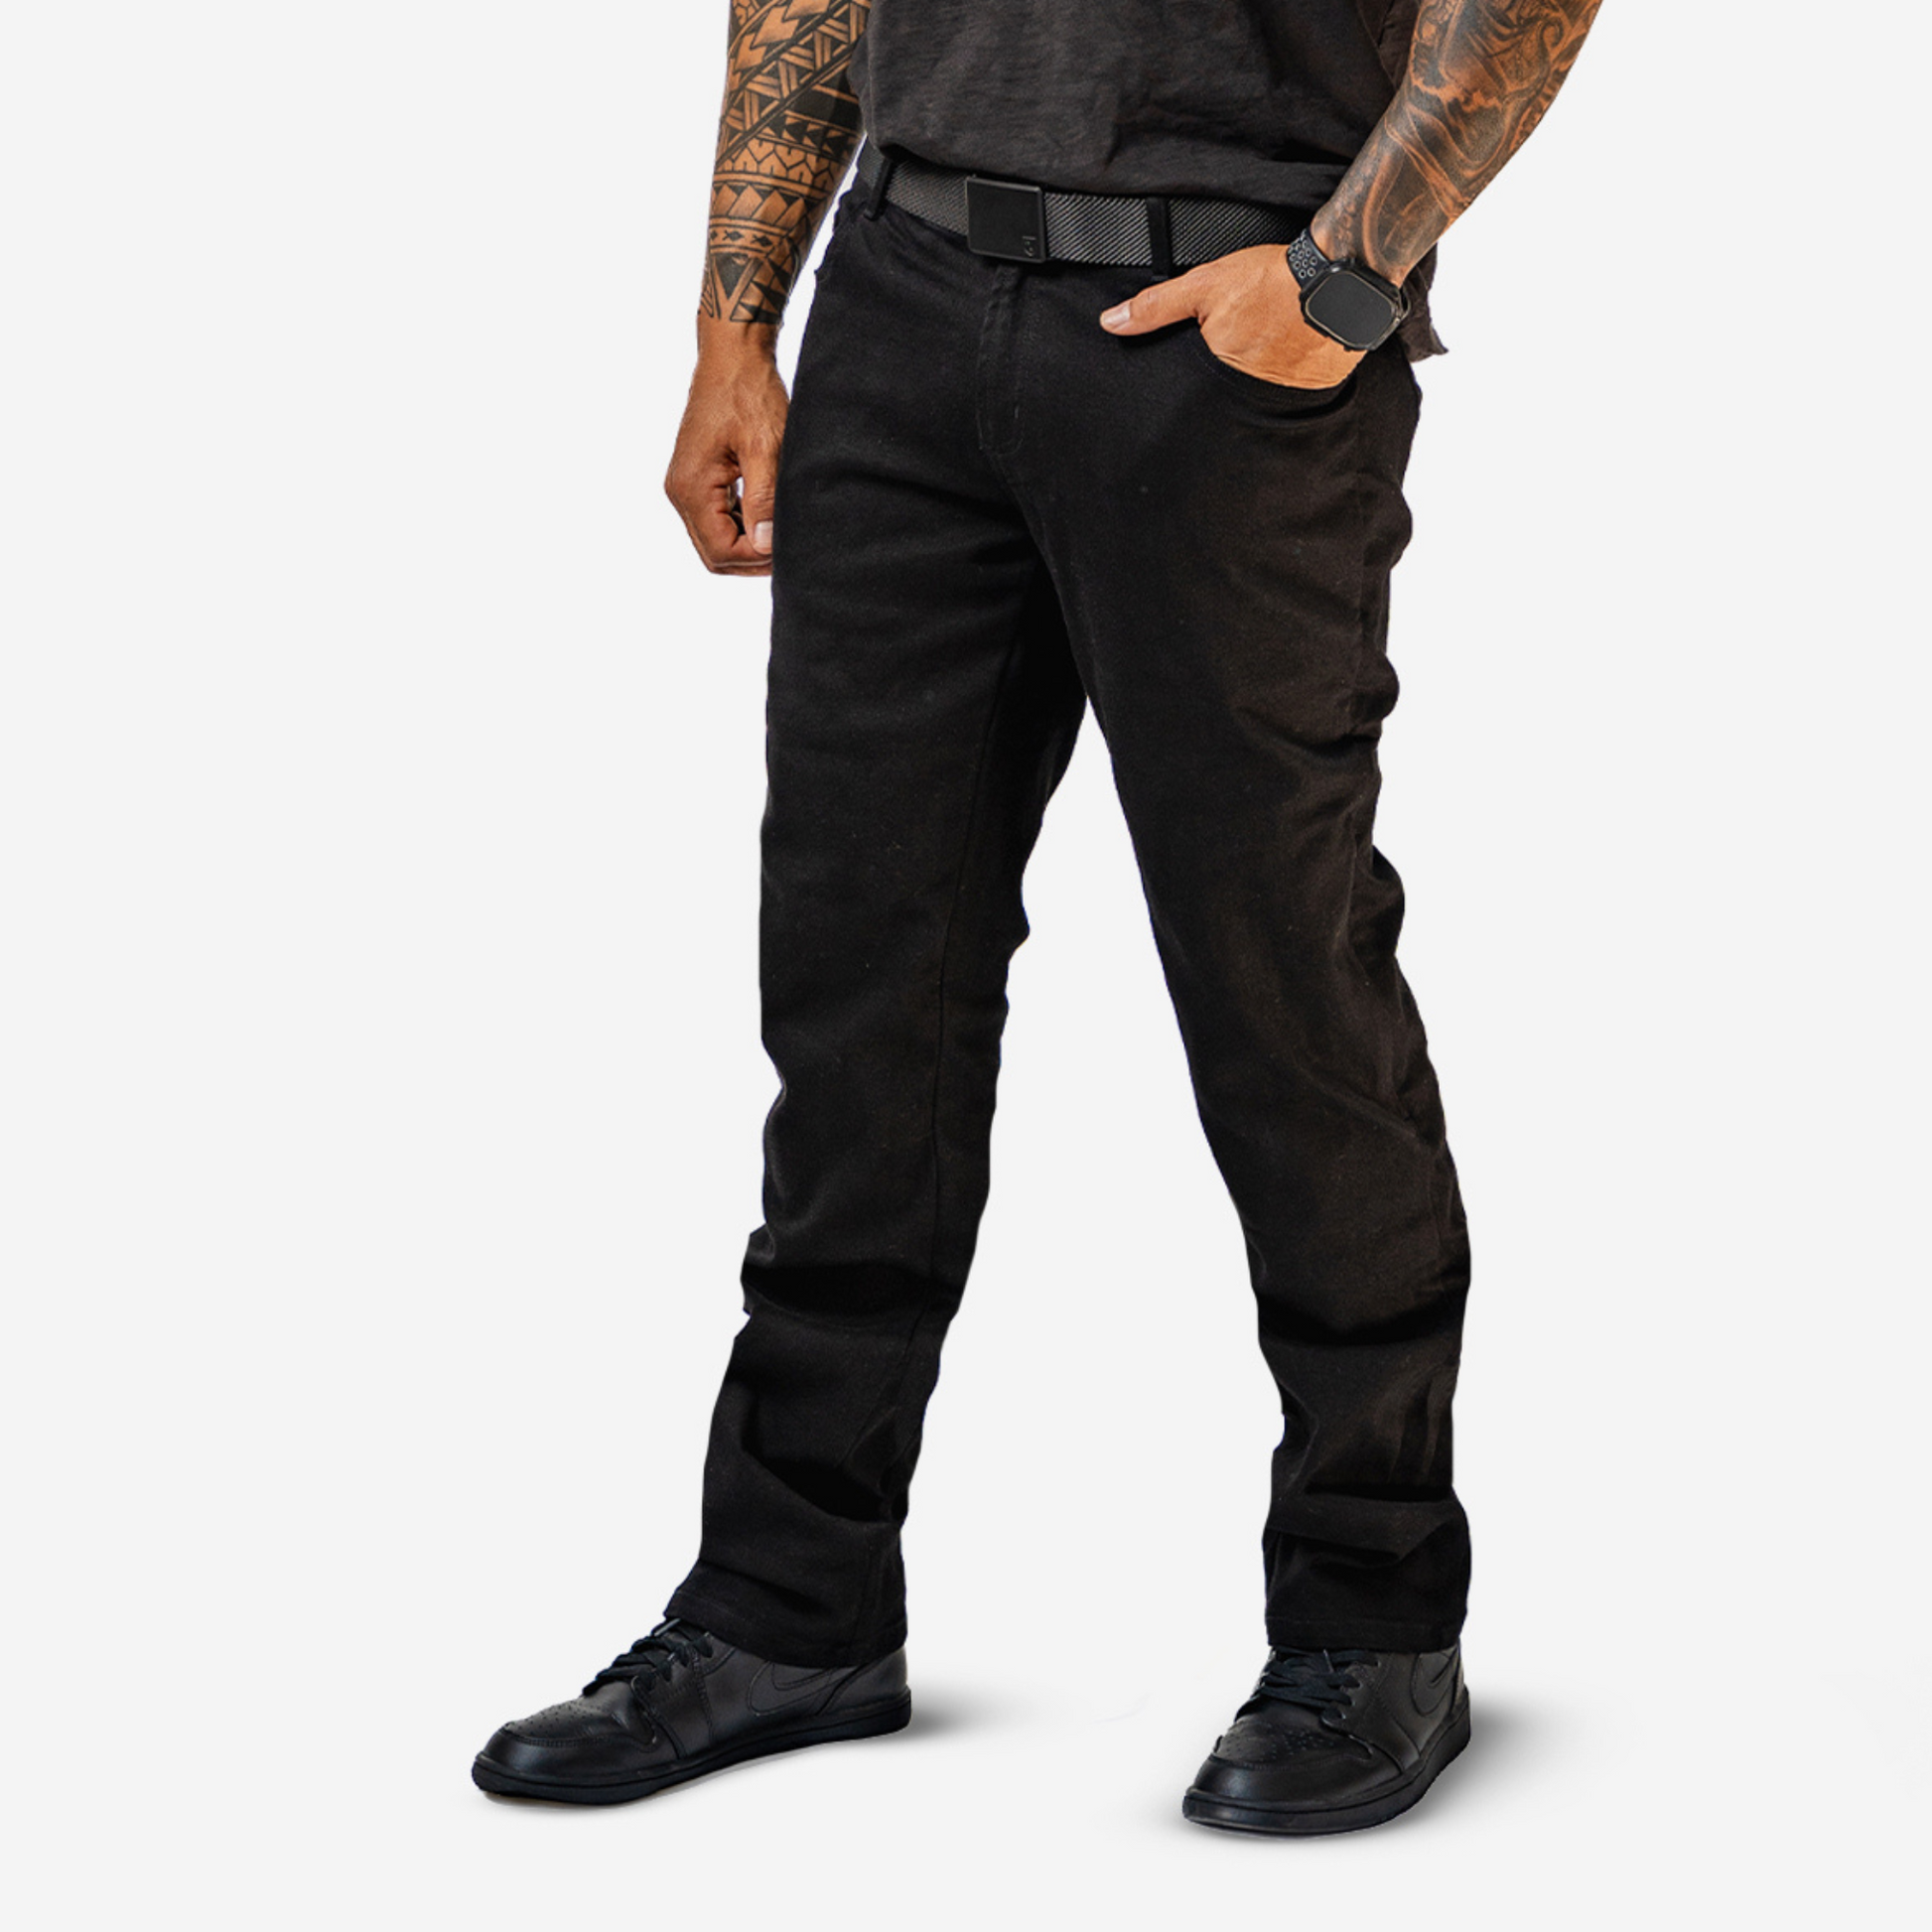 Motorcycle Jeans For Men  Armored Pants Designed For Style and